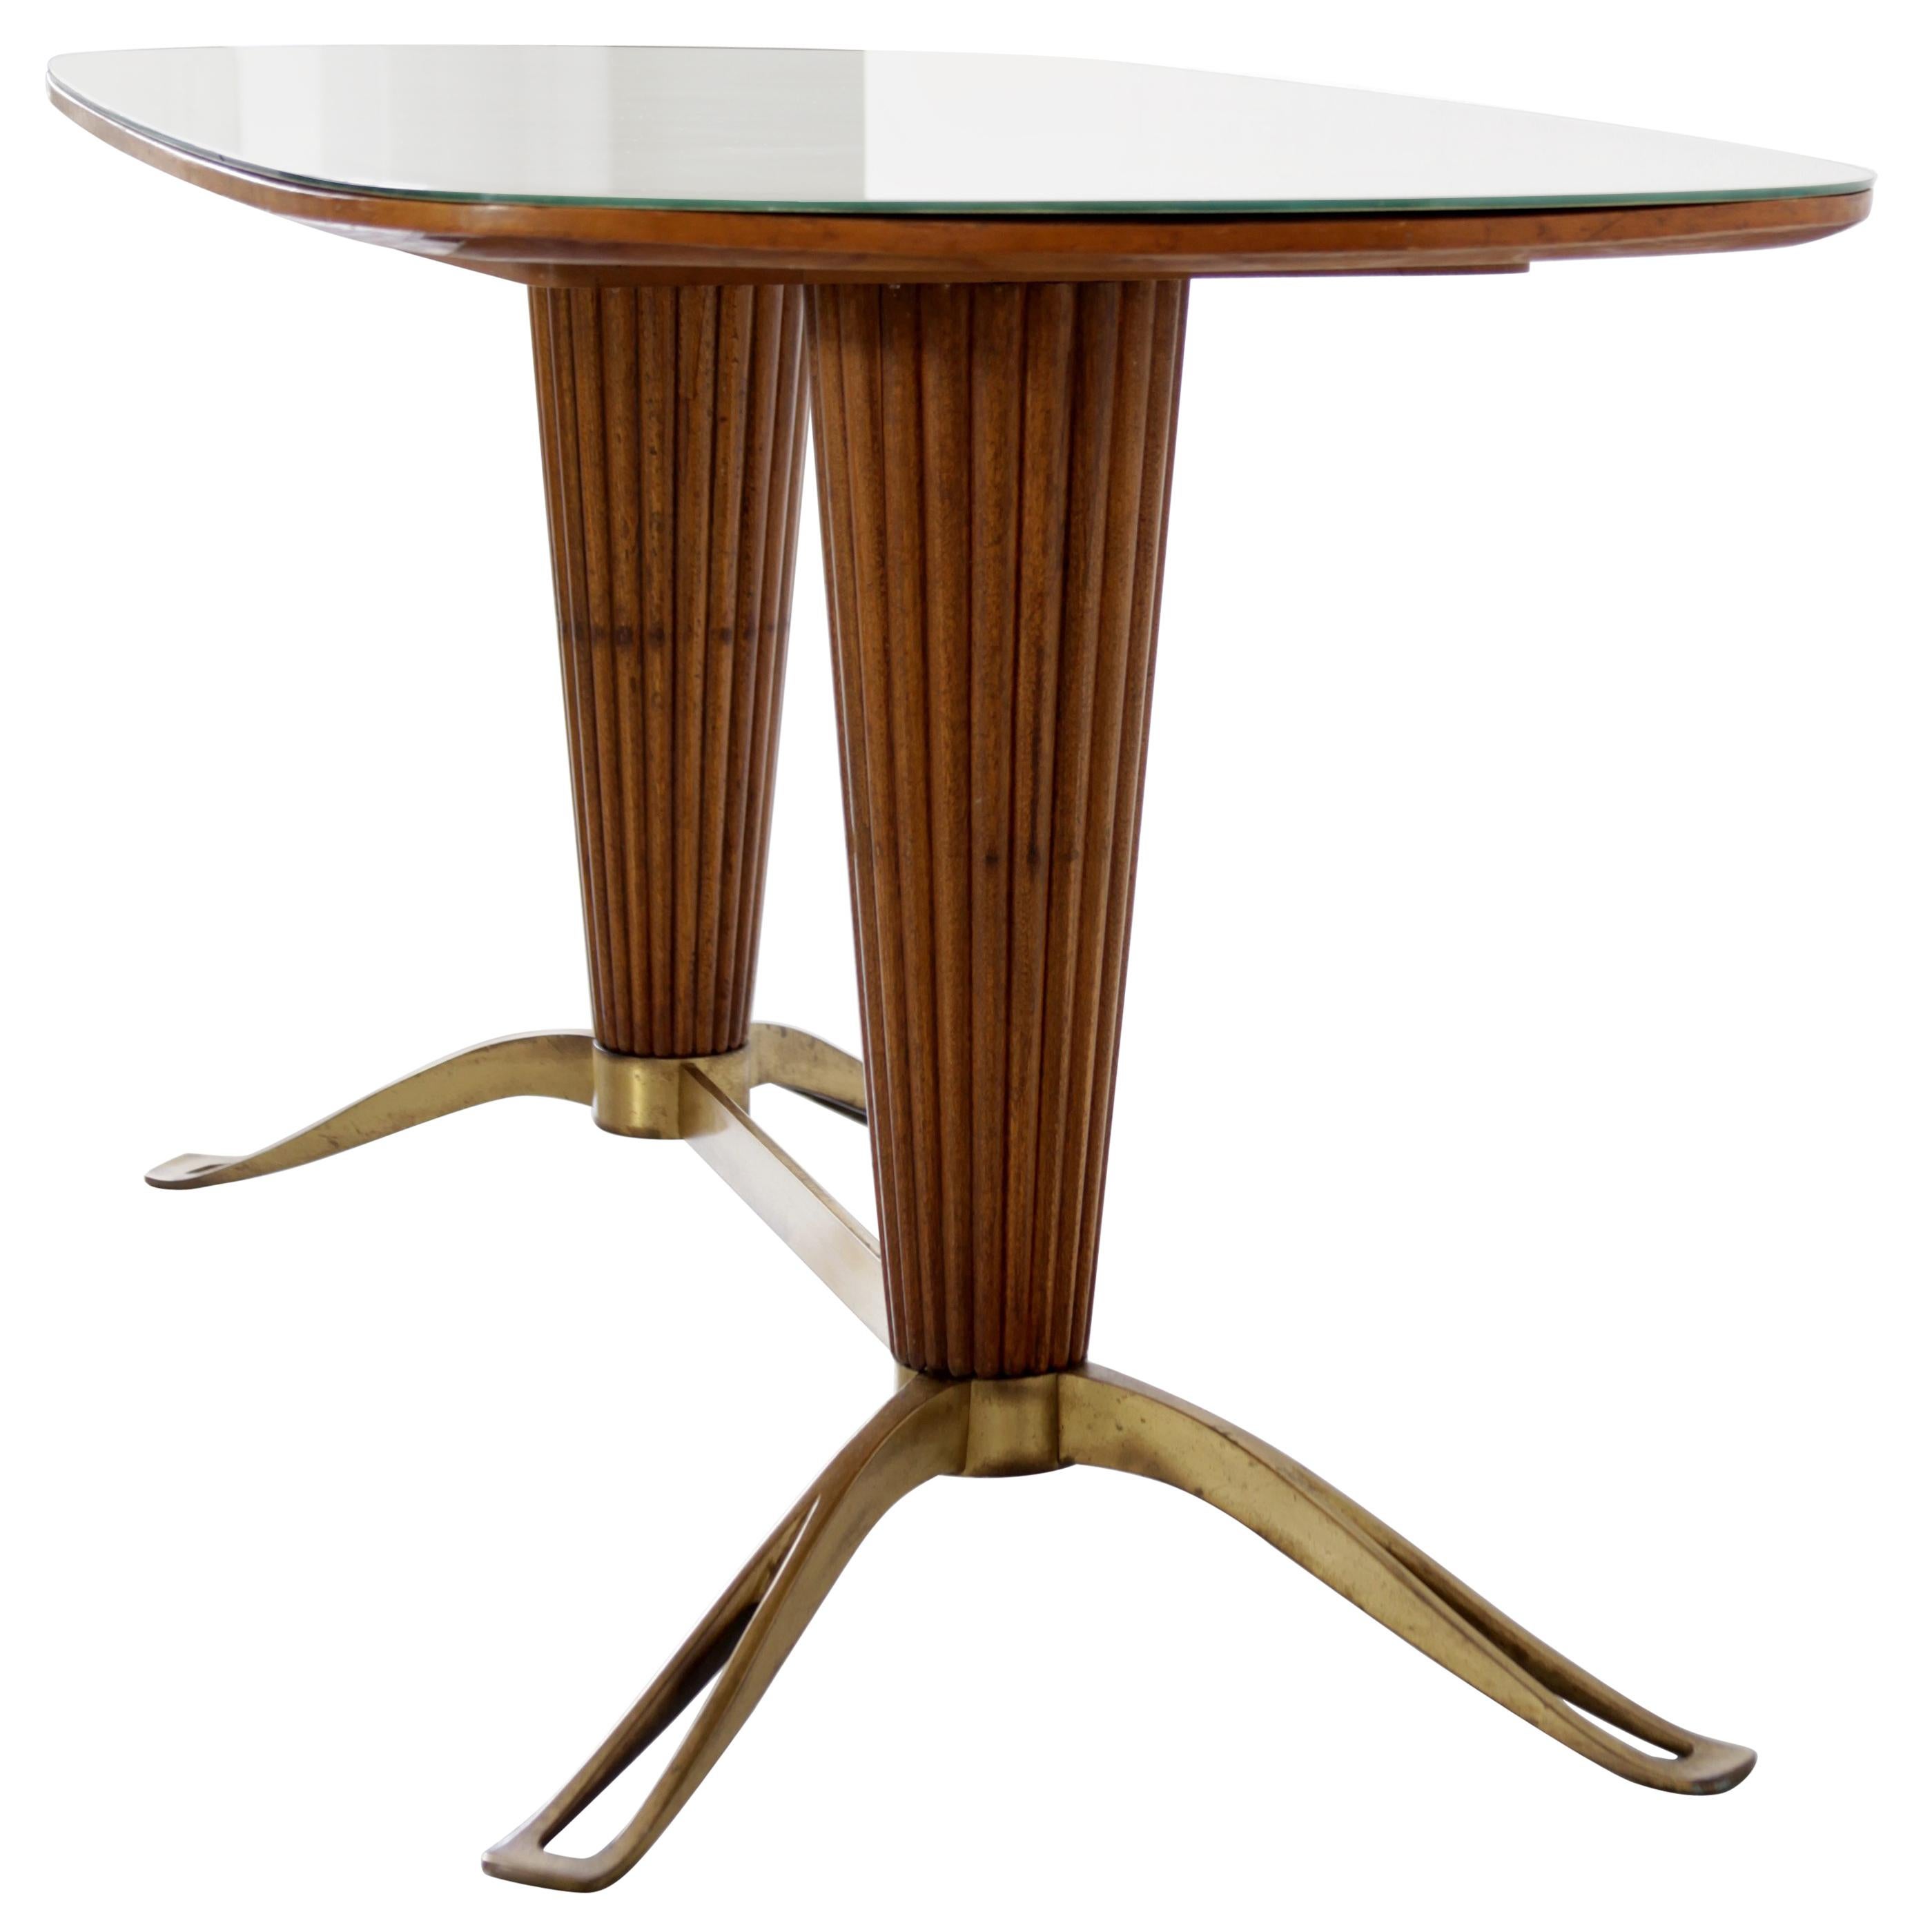 Tapered Column Base and Glass Top Table